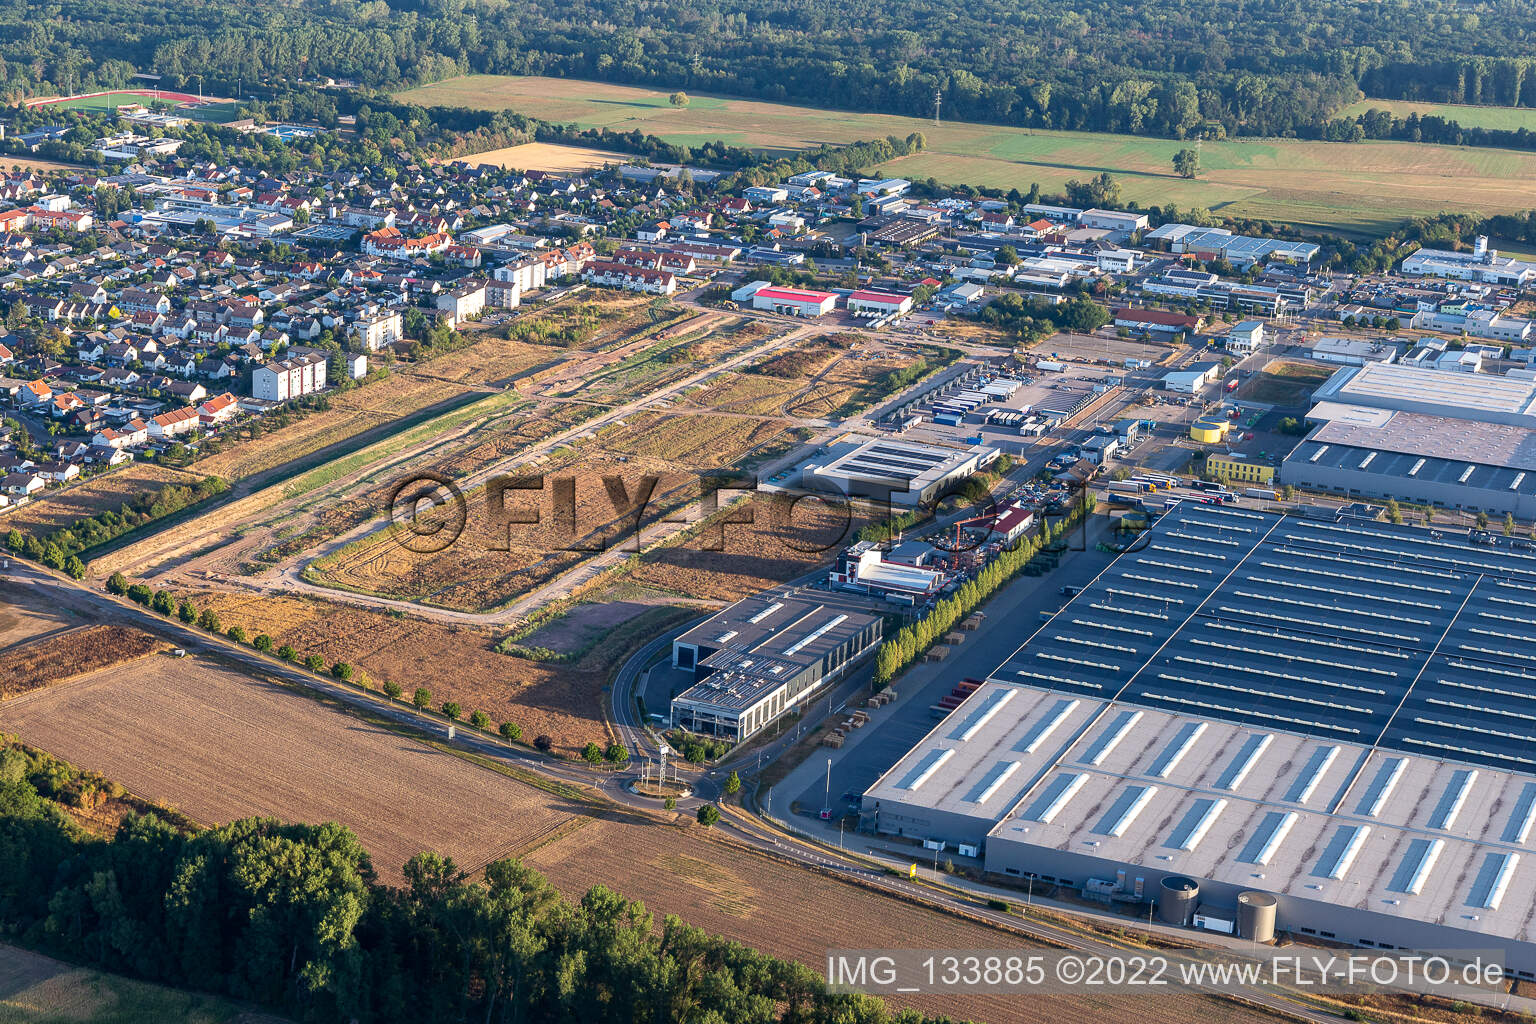 Expansion area of the Interpark in Offenbach an der Queich in the state Rhineland-Palatinate, Germany